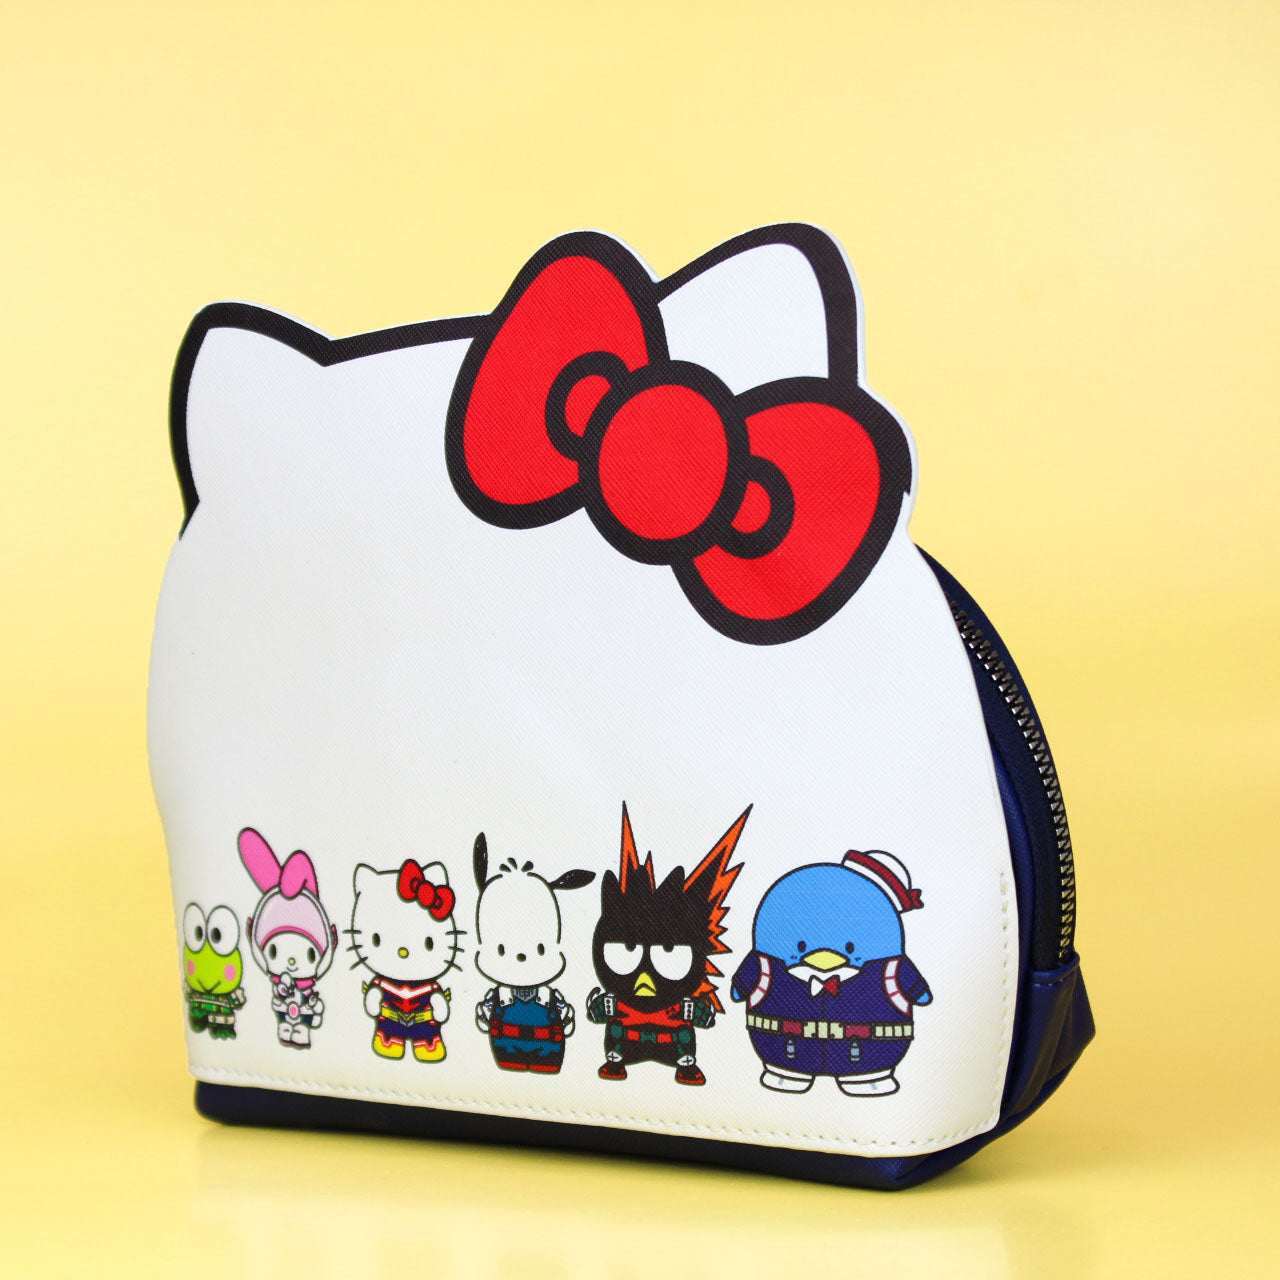 Sanrio Hello Kitty Red Cosmetic Bag Ins Simple Large Capacity